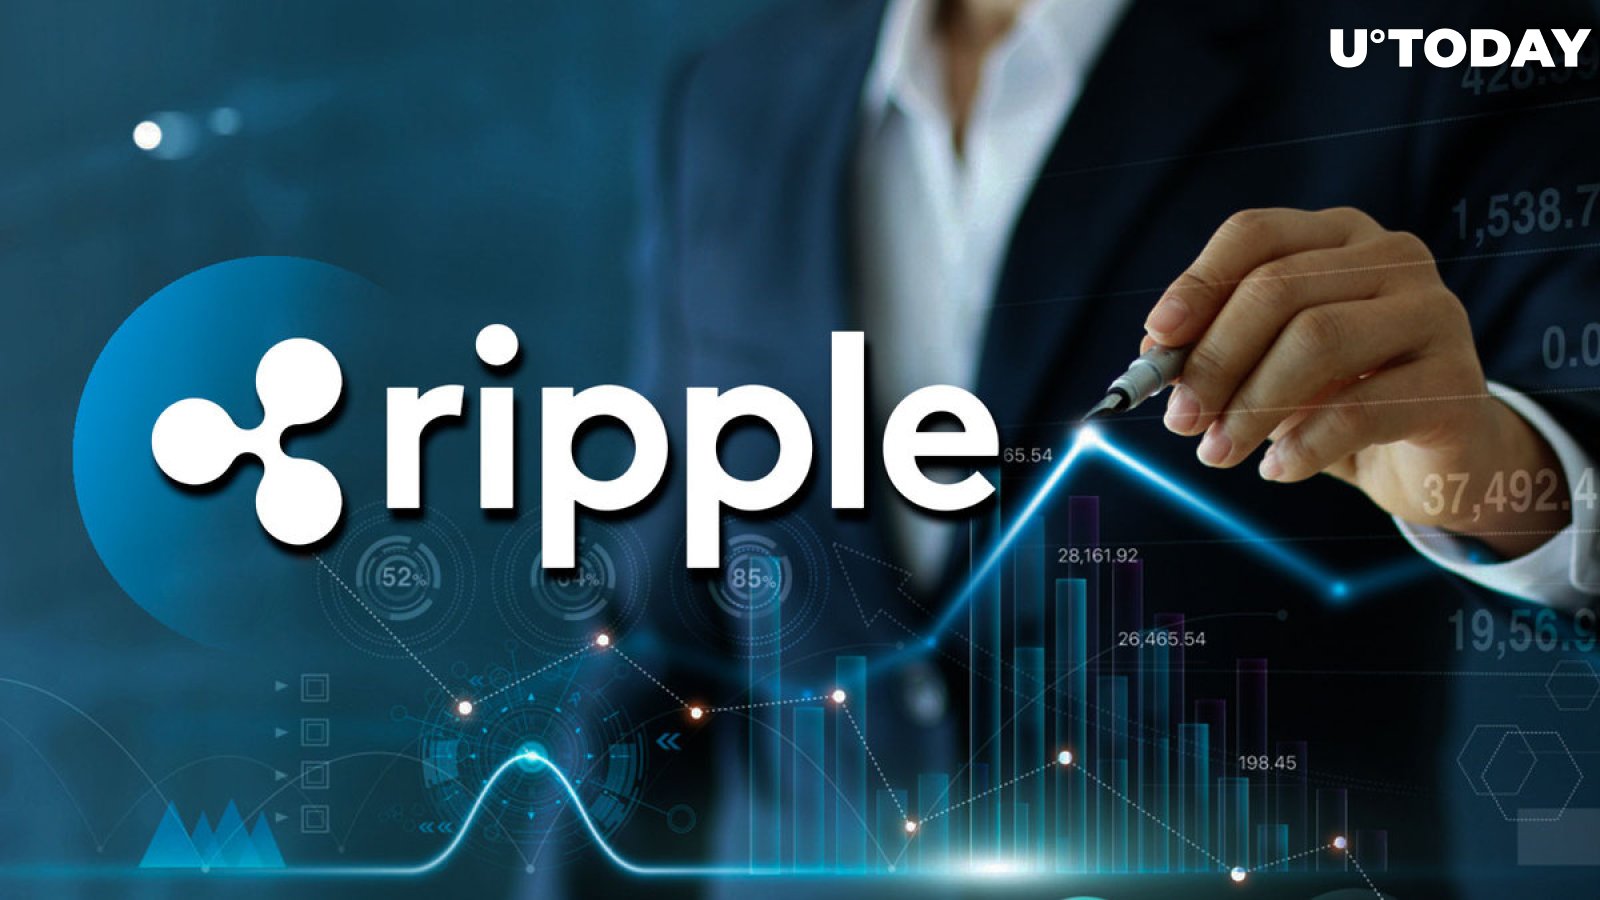 Ripple to Expand Wider? 70% of Finance Leaders Confident in Crypto Now